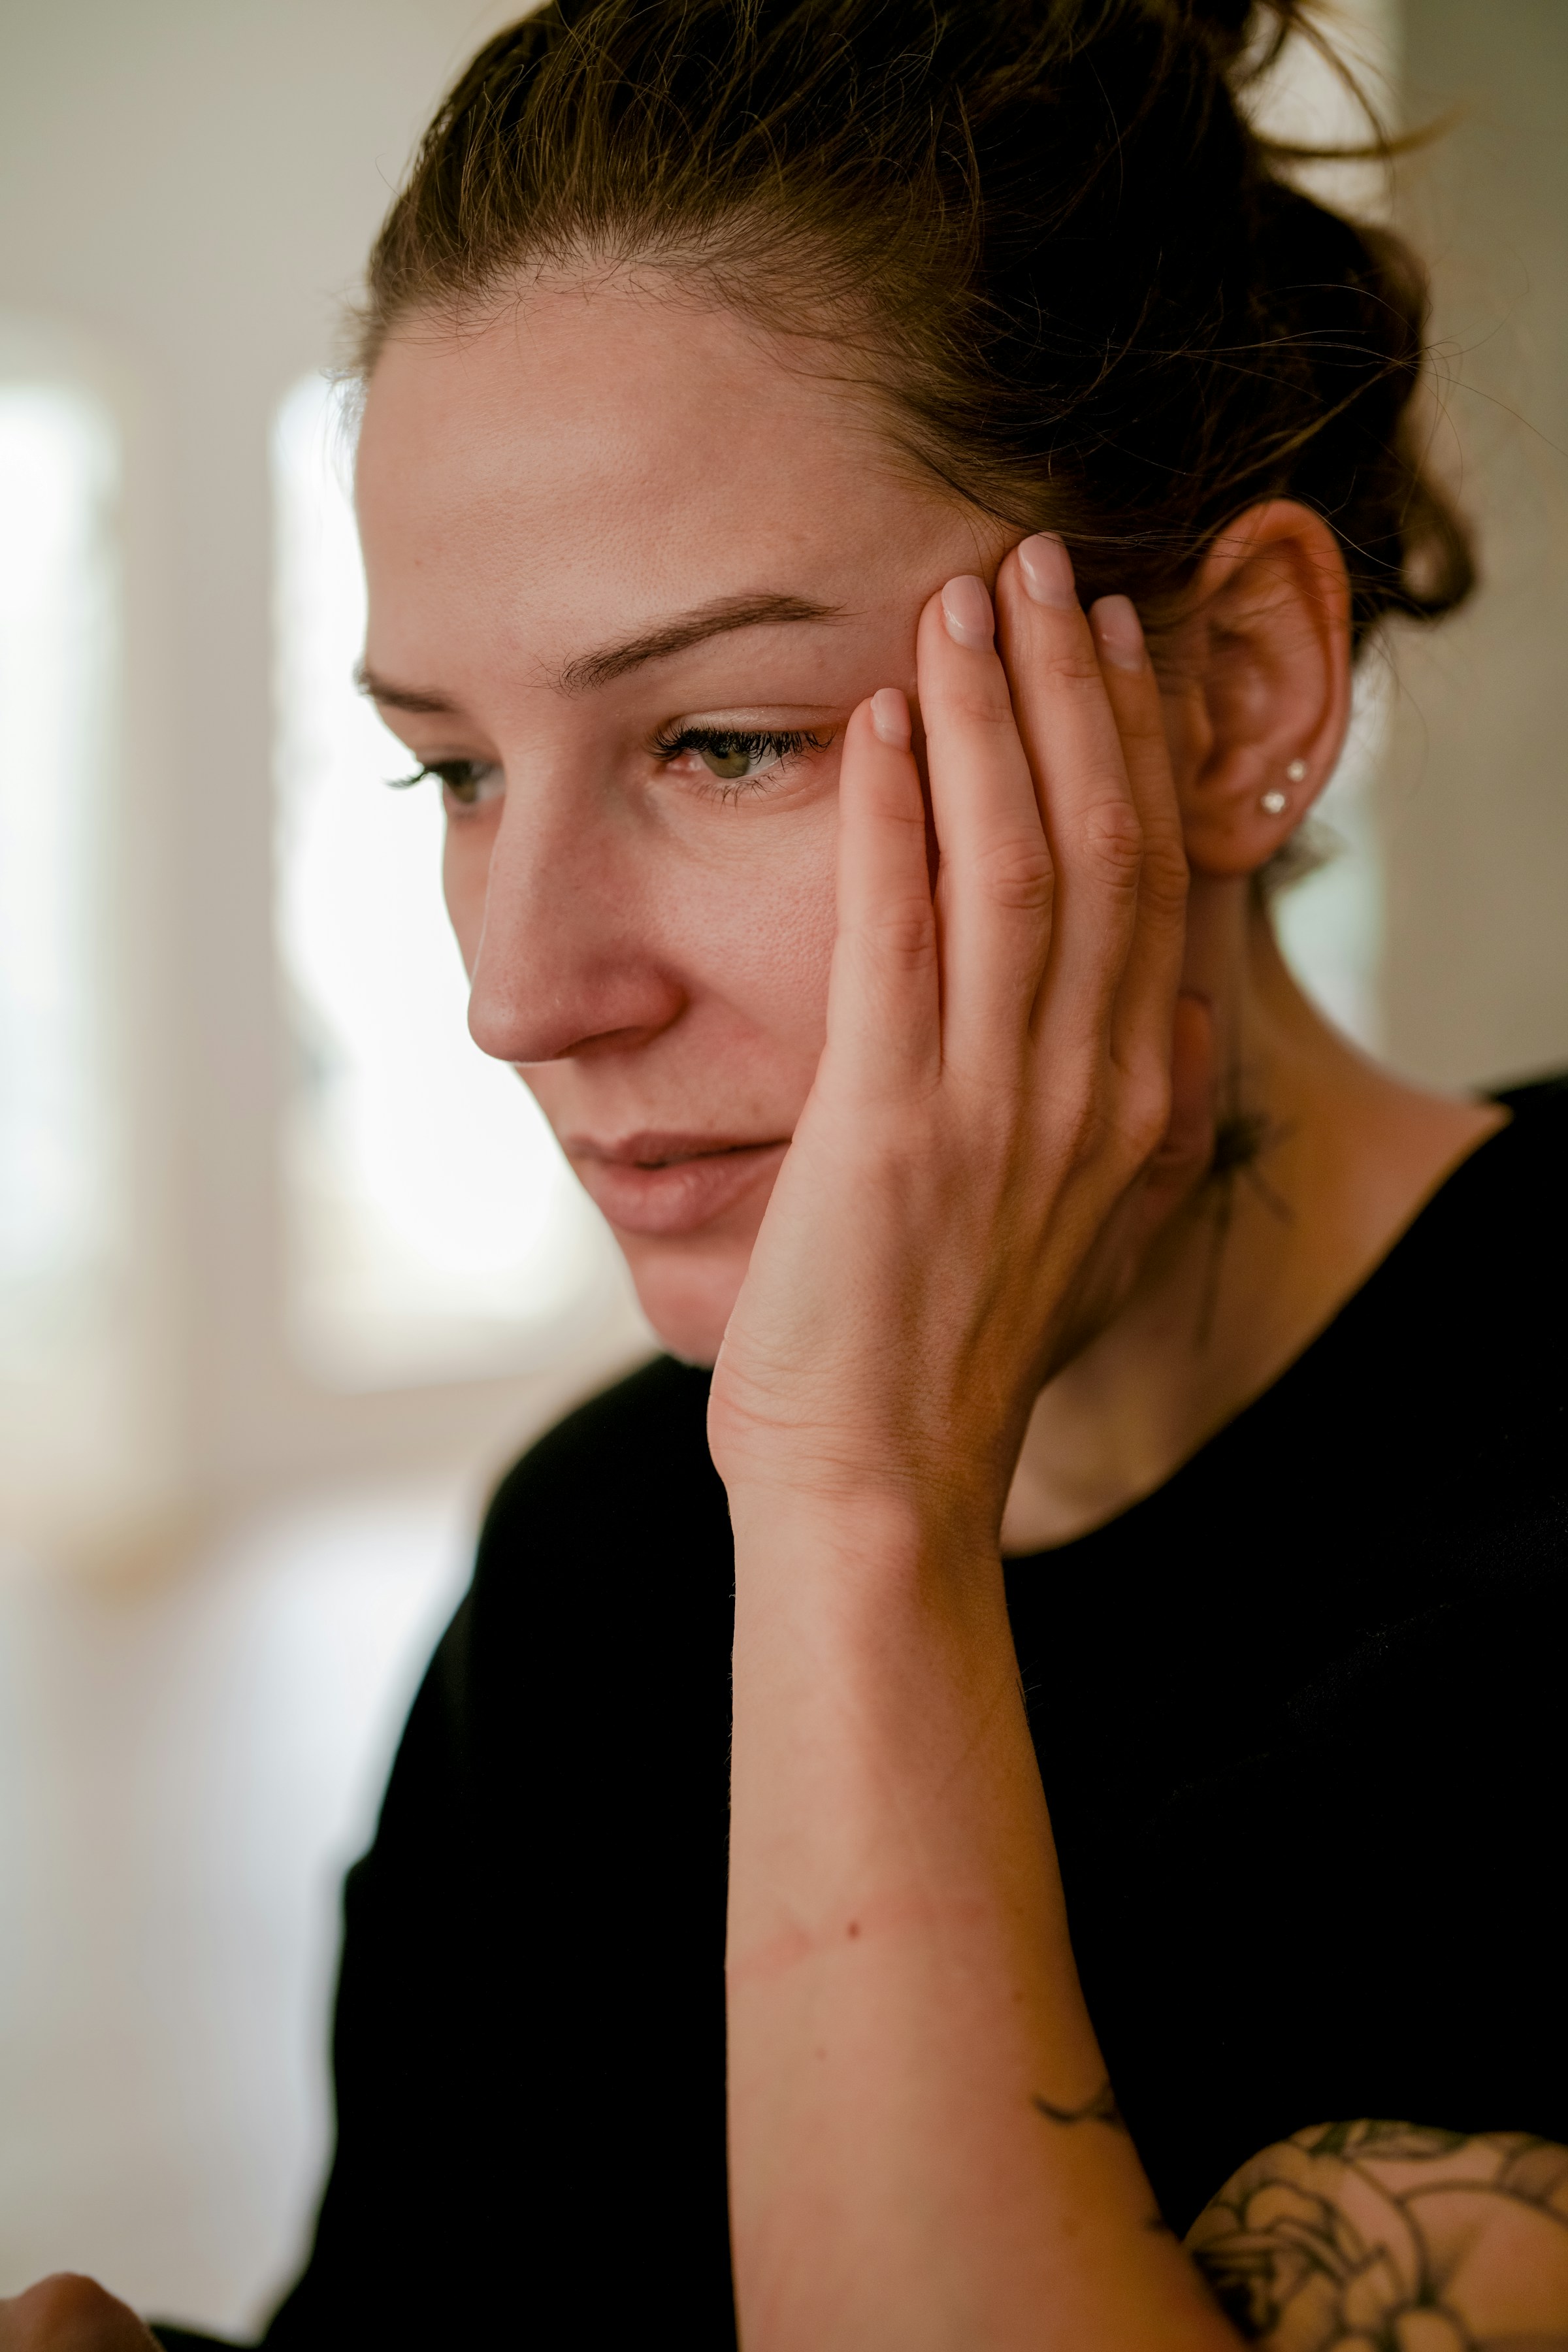 A stressed woman with her hand on her face | Source: Unsplash